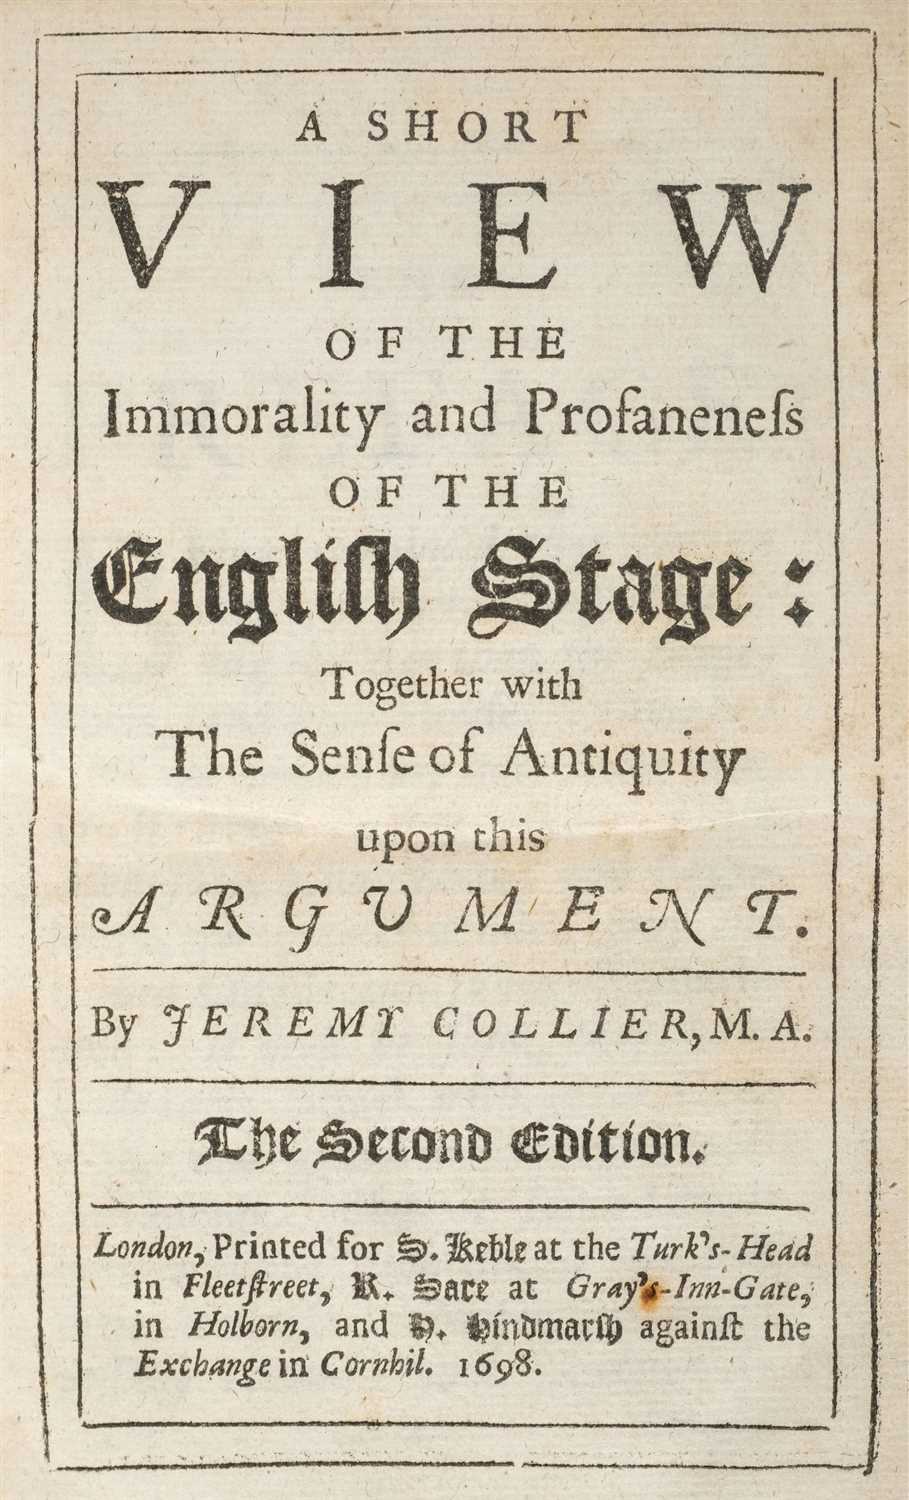 Lot 101 - Collier (Jeremy). Immorality and Profaneness of the English Stage, 2nd edition, 1698